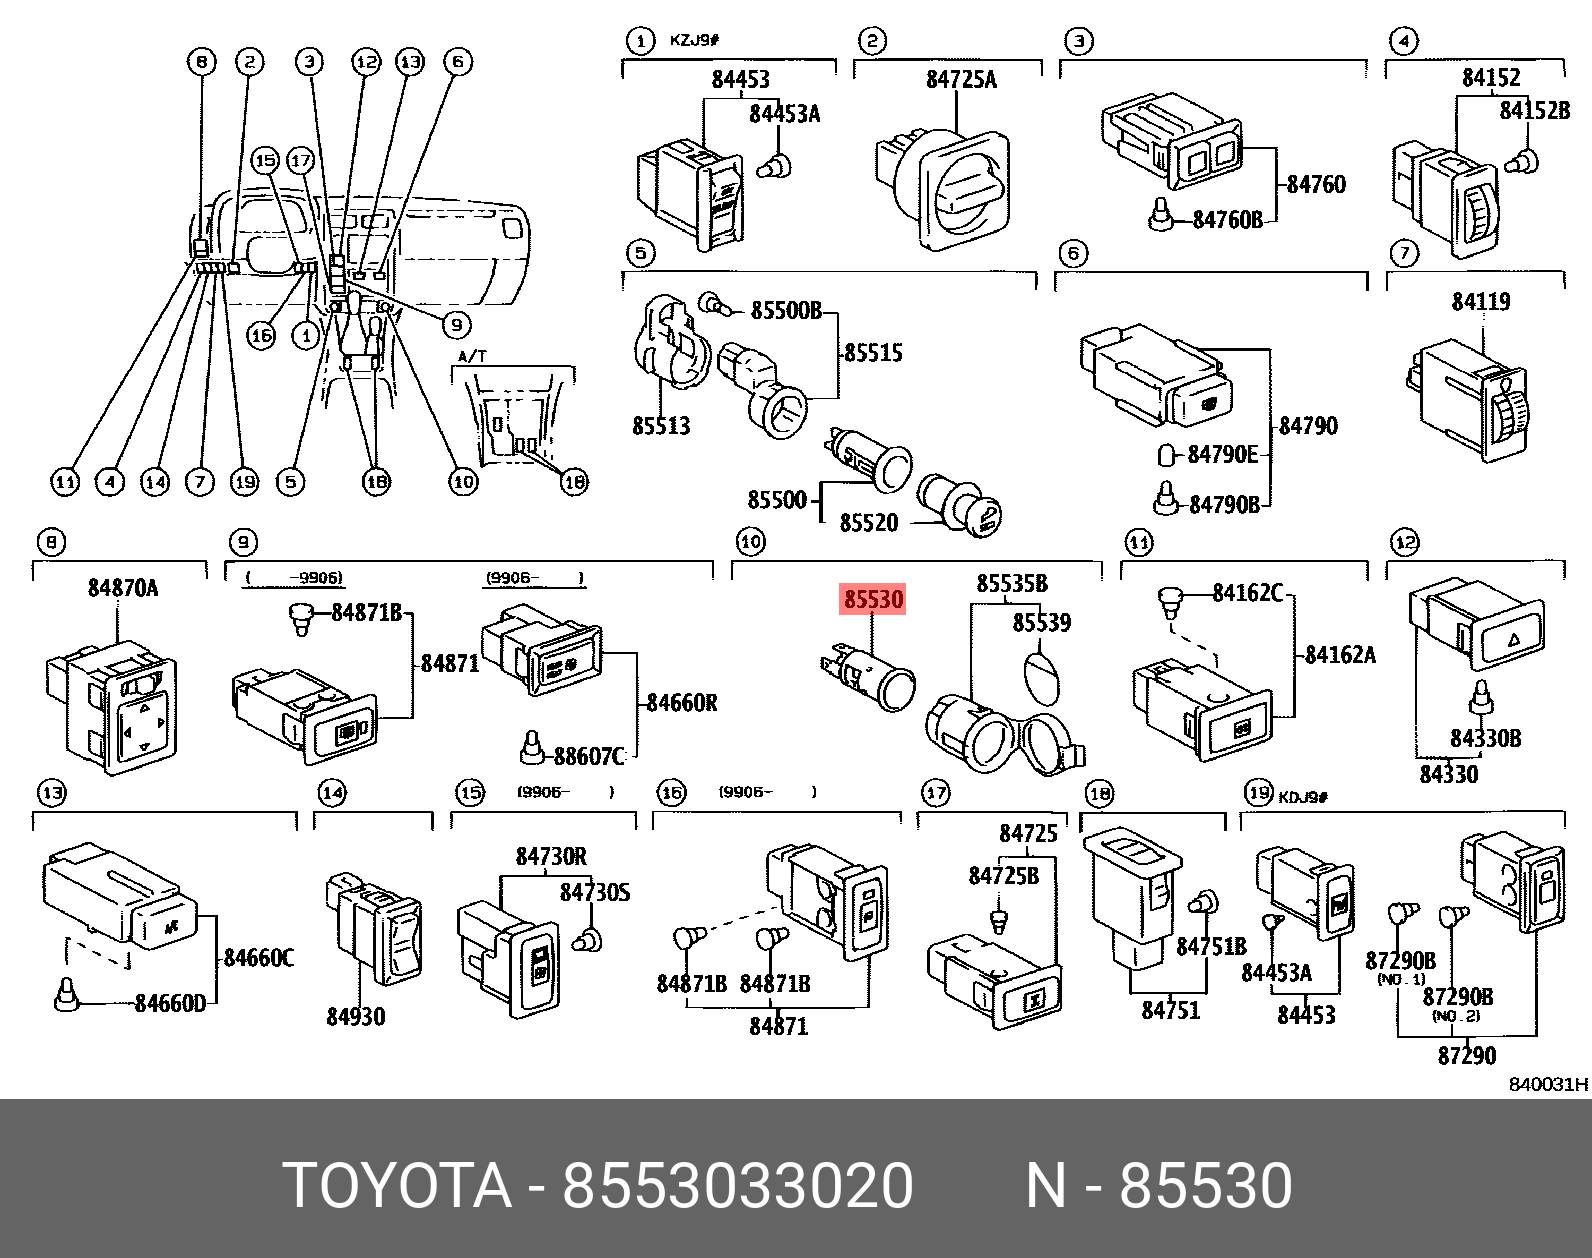 WILL CYPHA 200209 - 200507, SOCKET ASSY, POWER OUTLET, NO.1